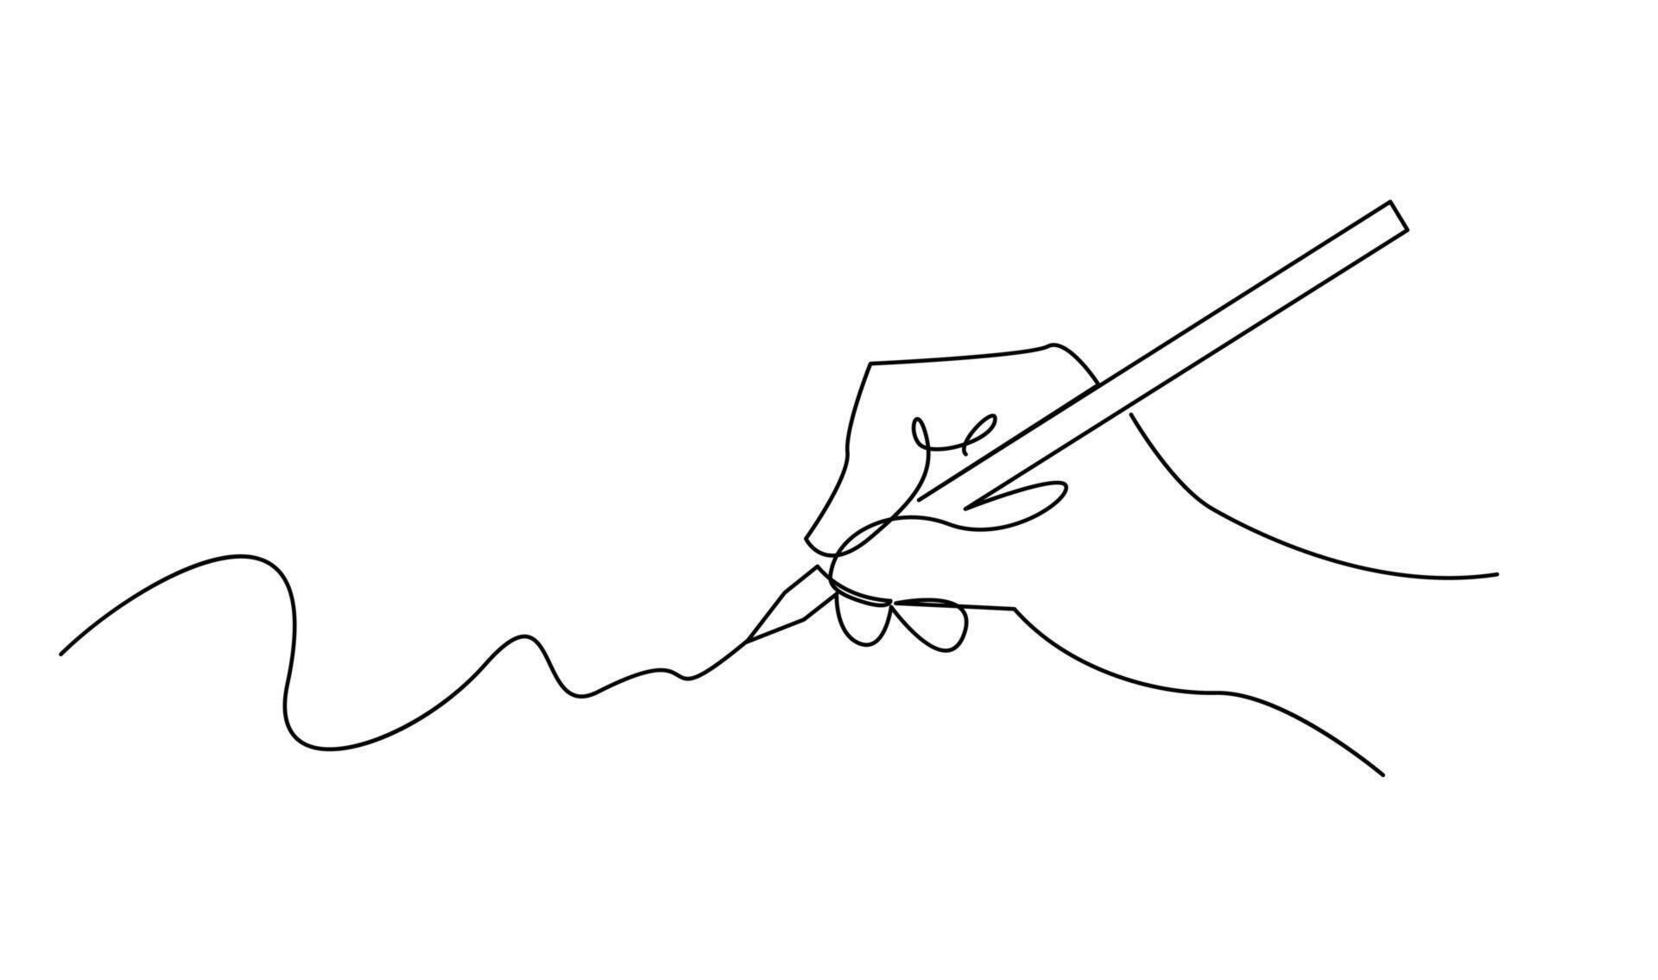 hand writing with pencil in continous line drawing vector illustration